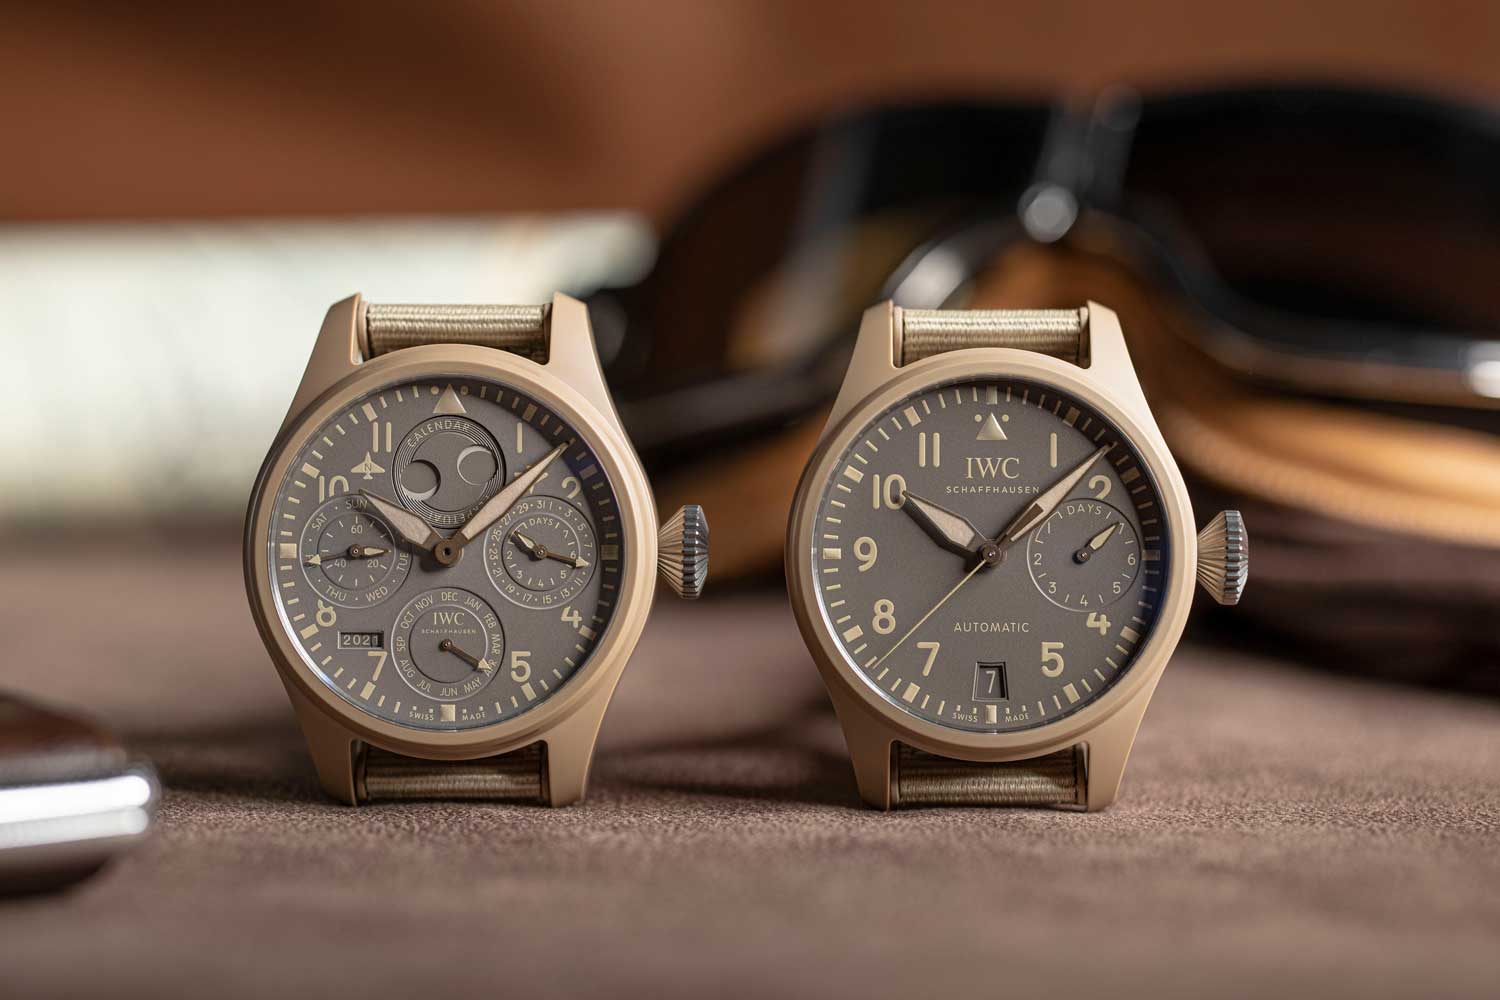 The Big Pilot’s Watch TOP GUN Edition “Mojave Desert” ref. 506003 (right) along with its Perpetual Calendar iteration